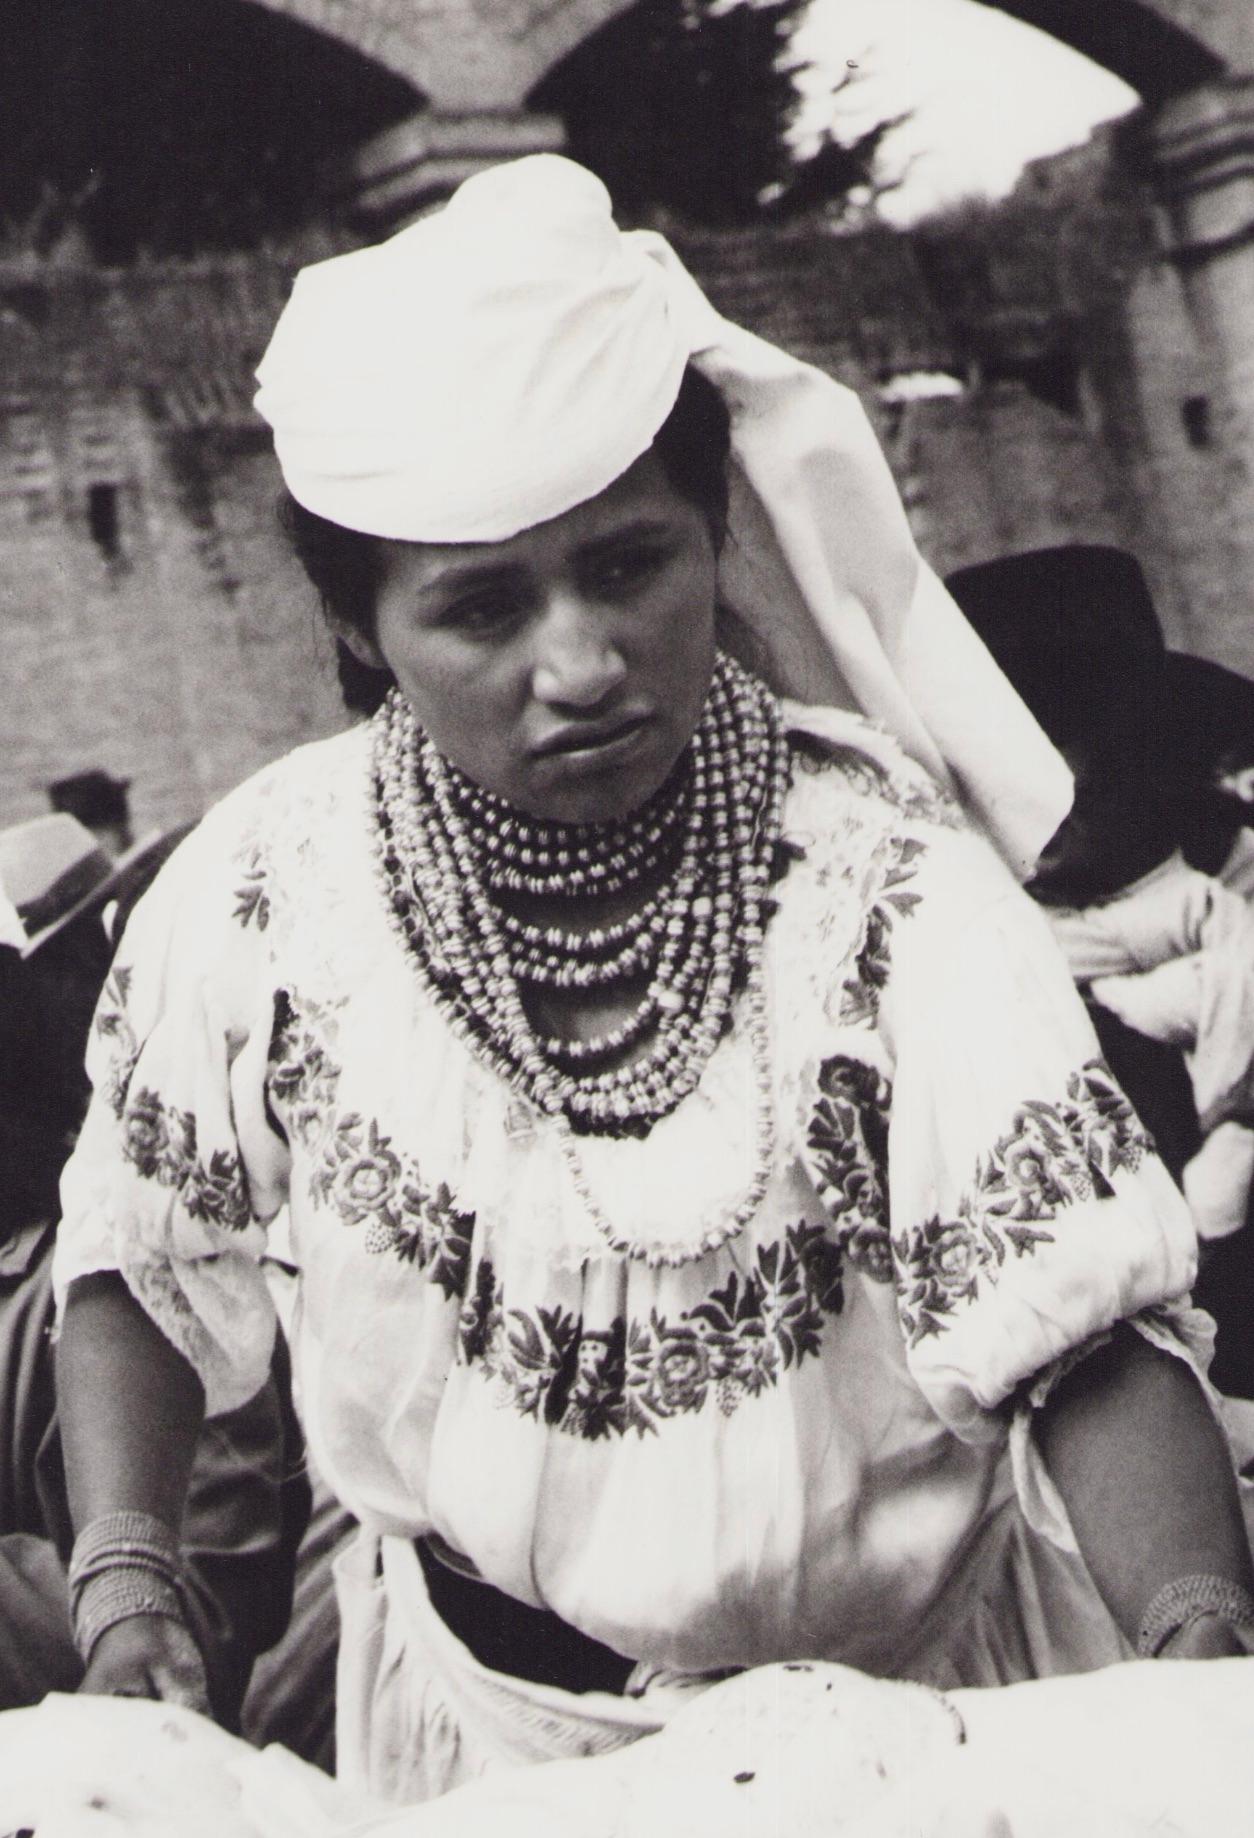 Ecuador, Woman, Market, Black and White Photography, 1960s, 28, 2 x 23, 1 cm For Sale 1